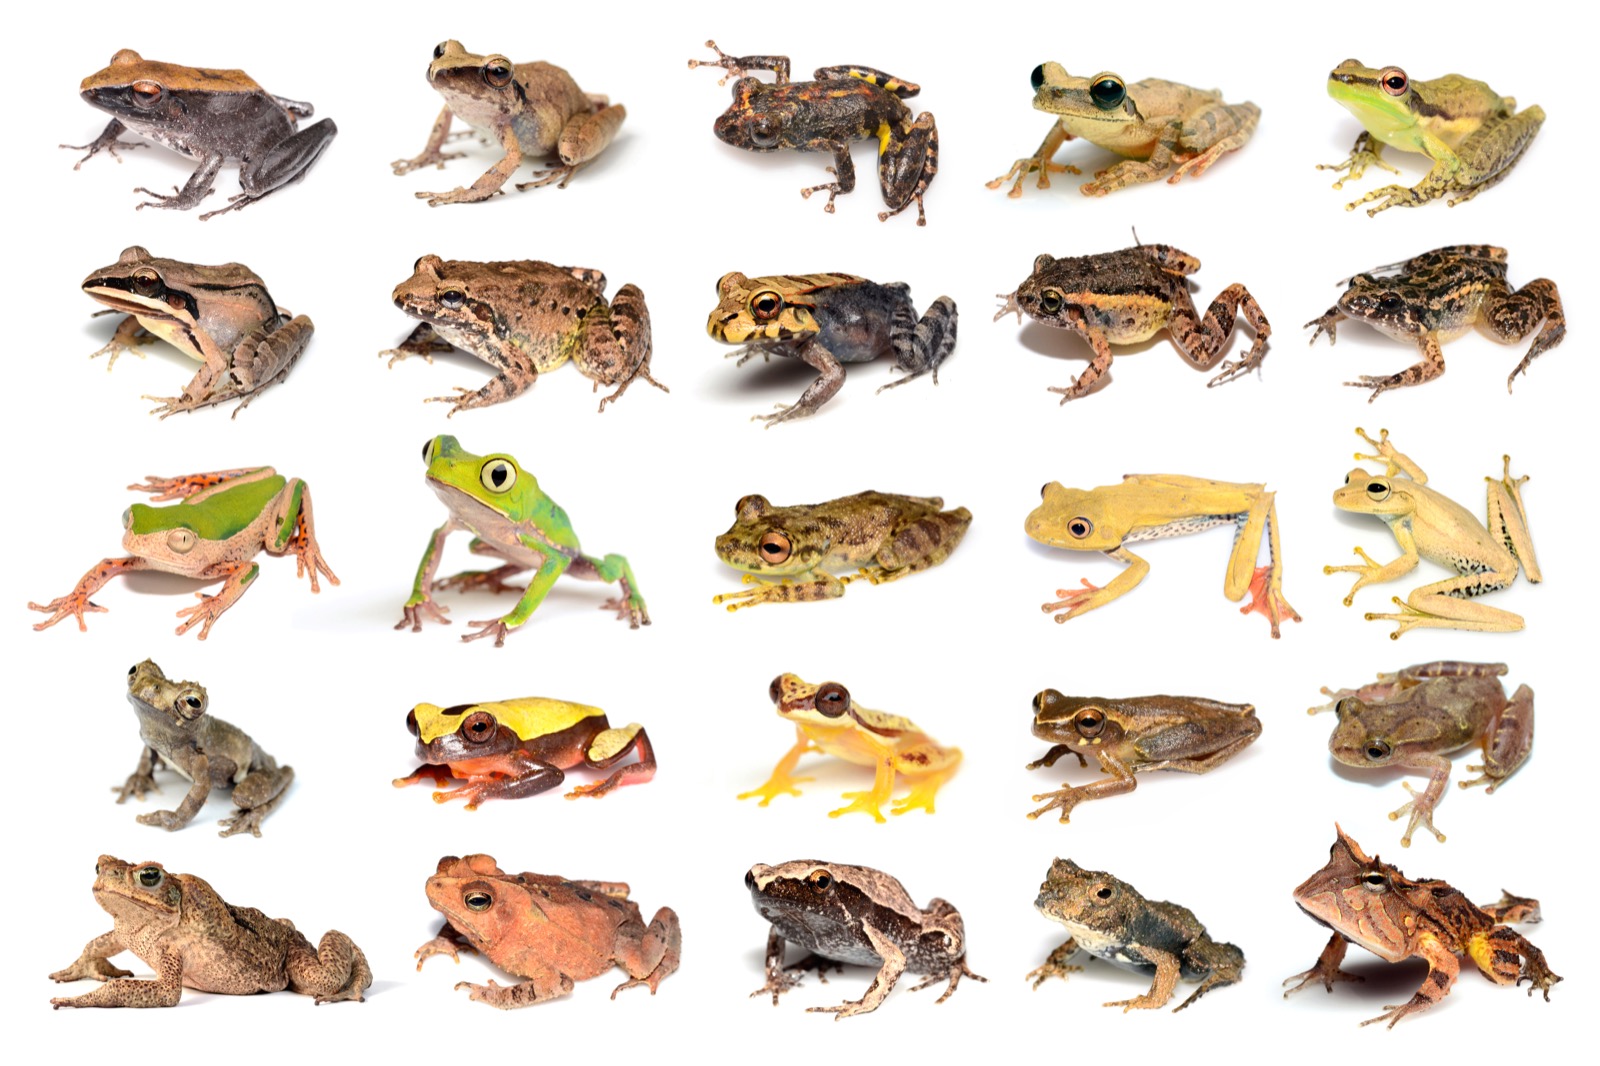 A collage of various frogs and toads on a white background.